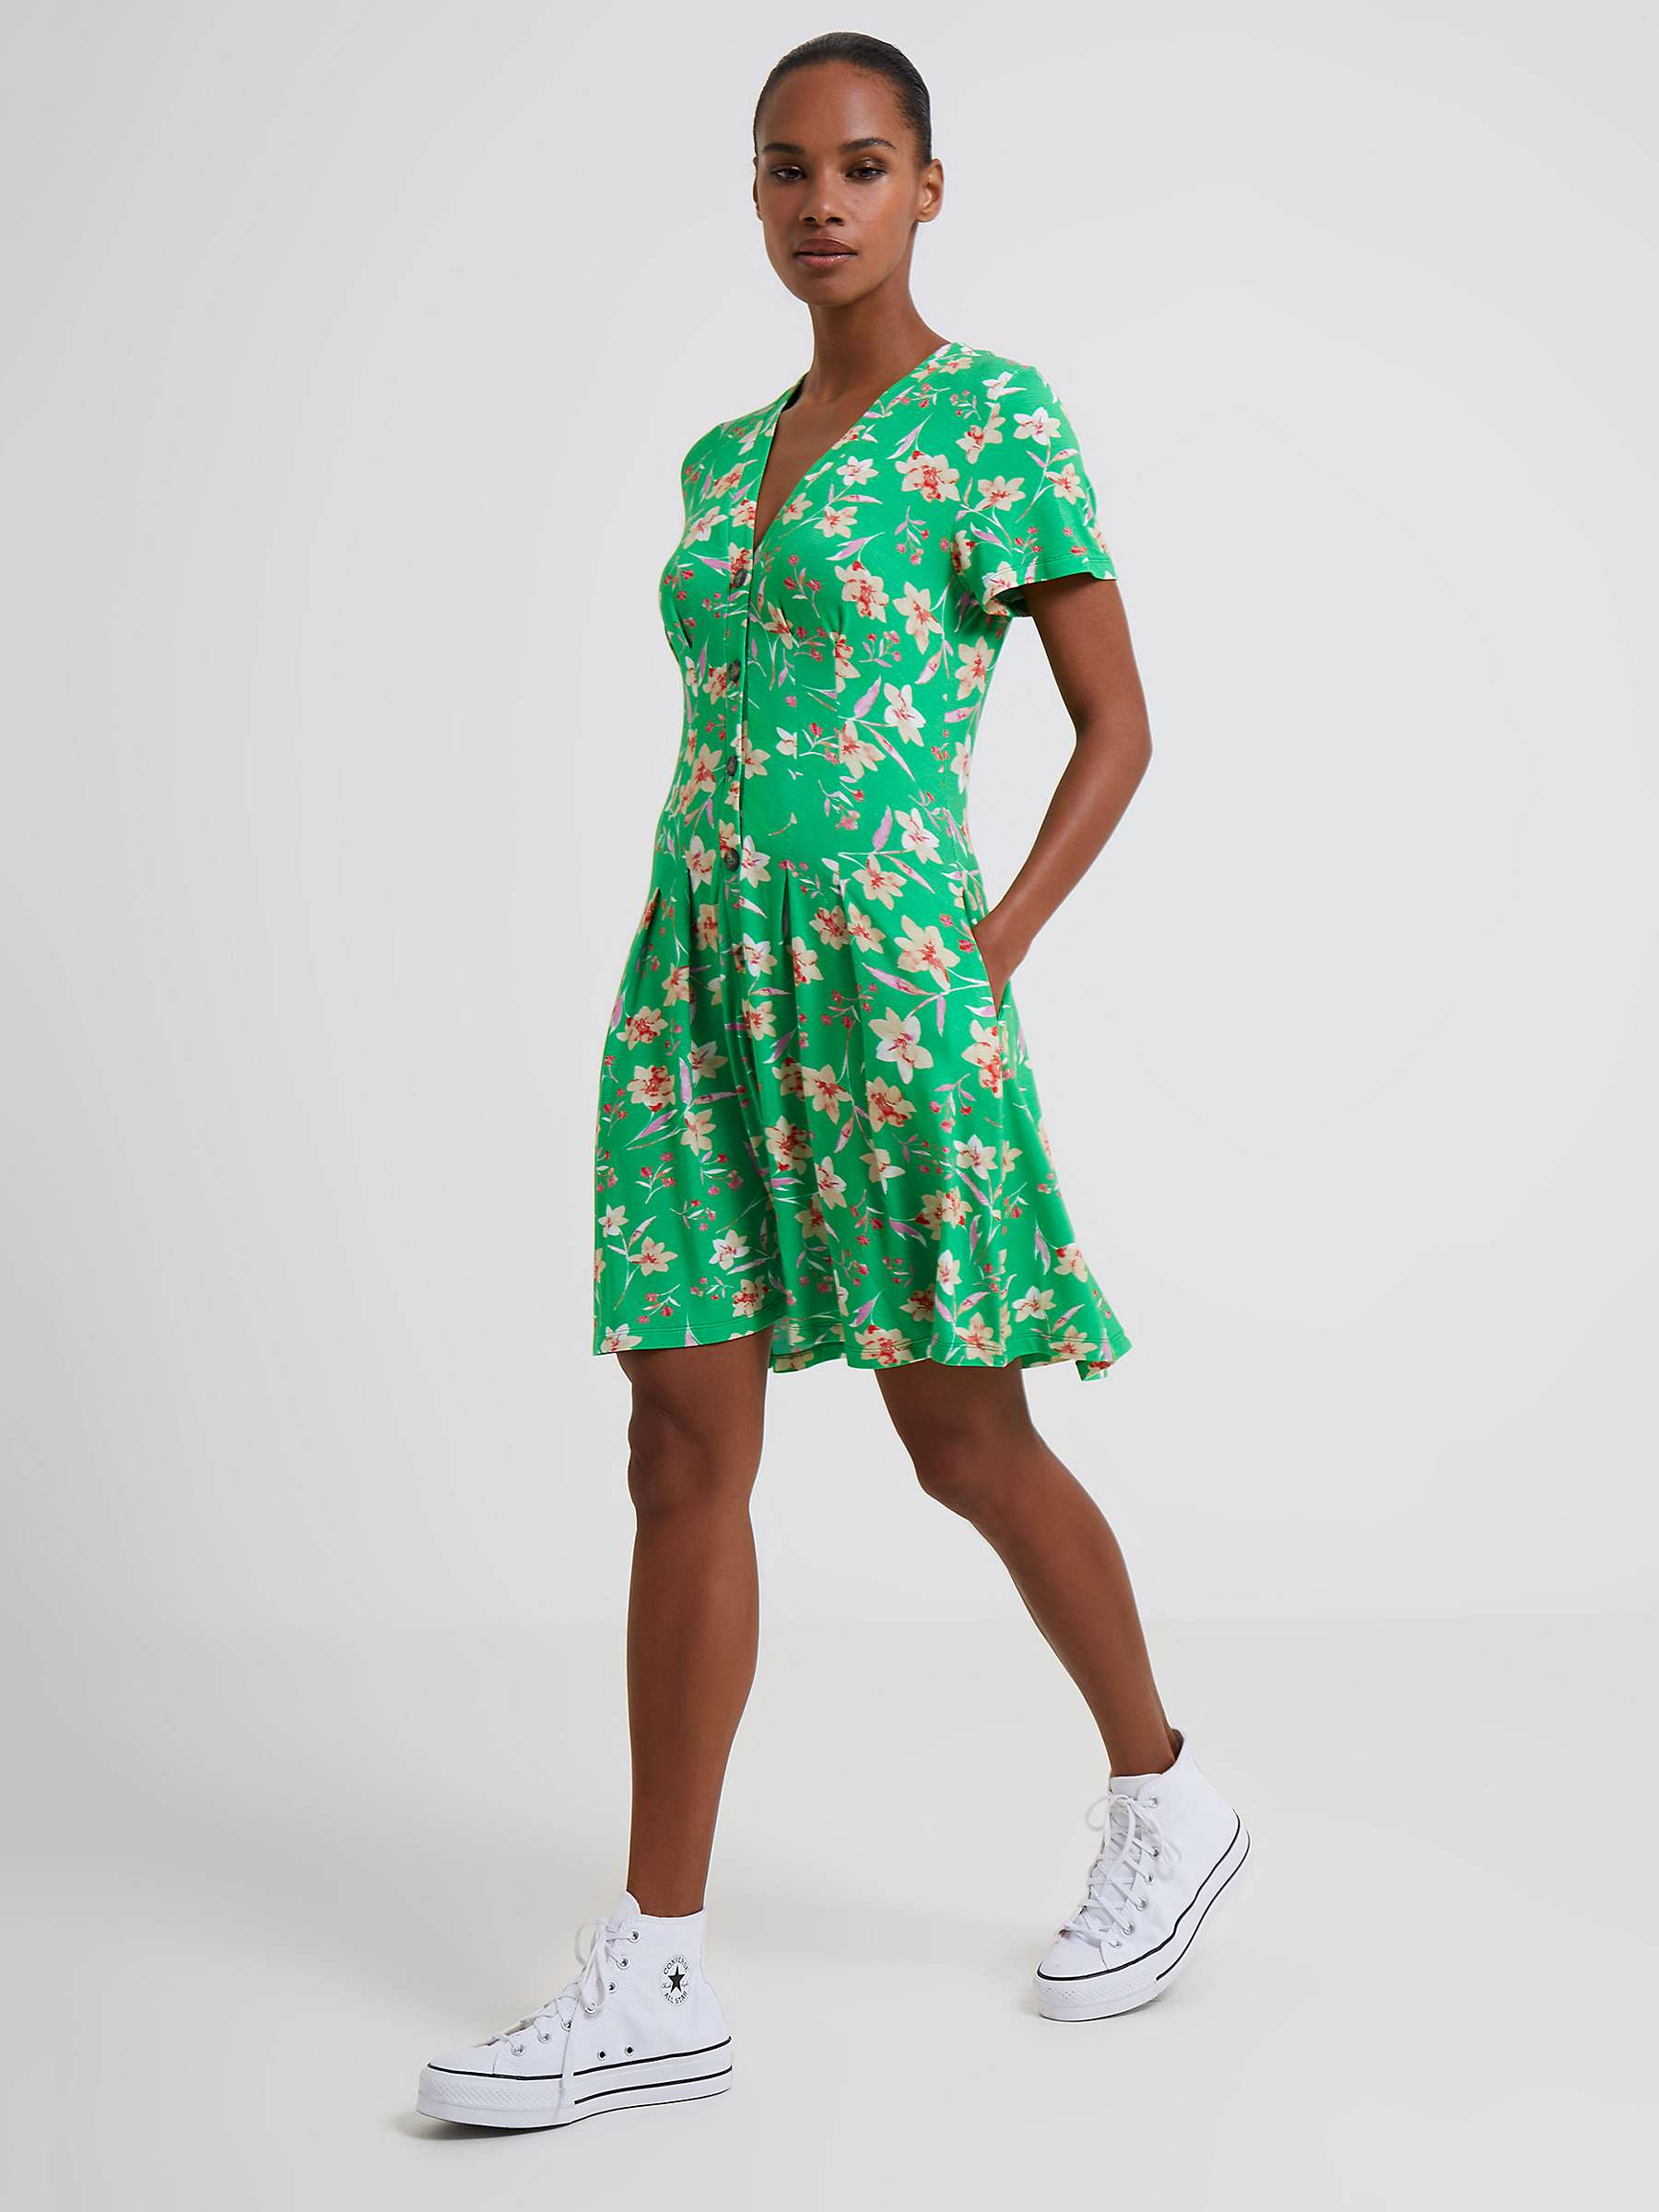 french connection dresses